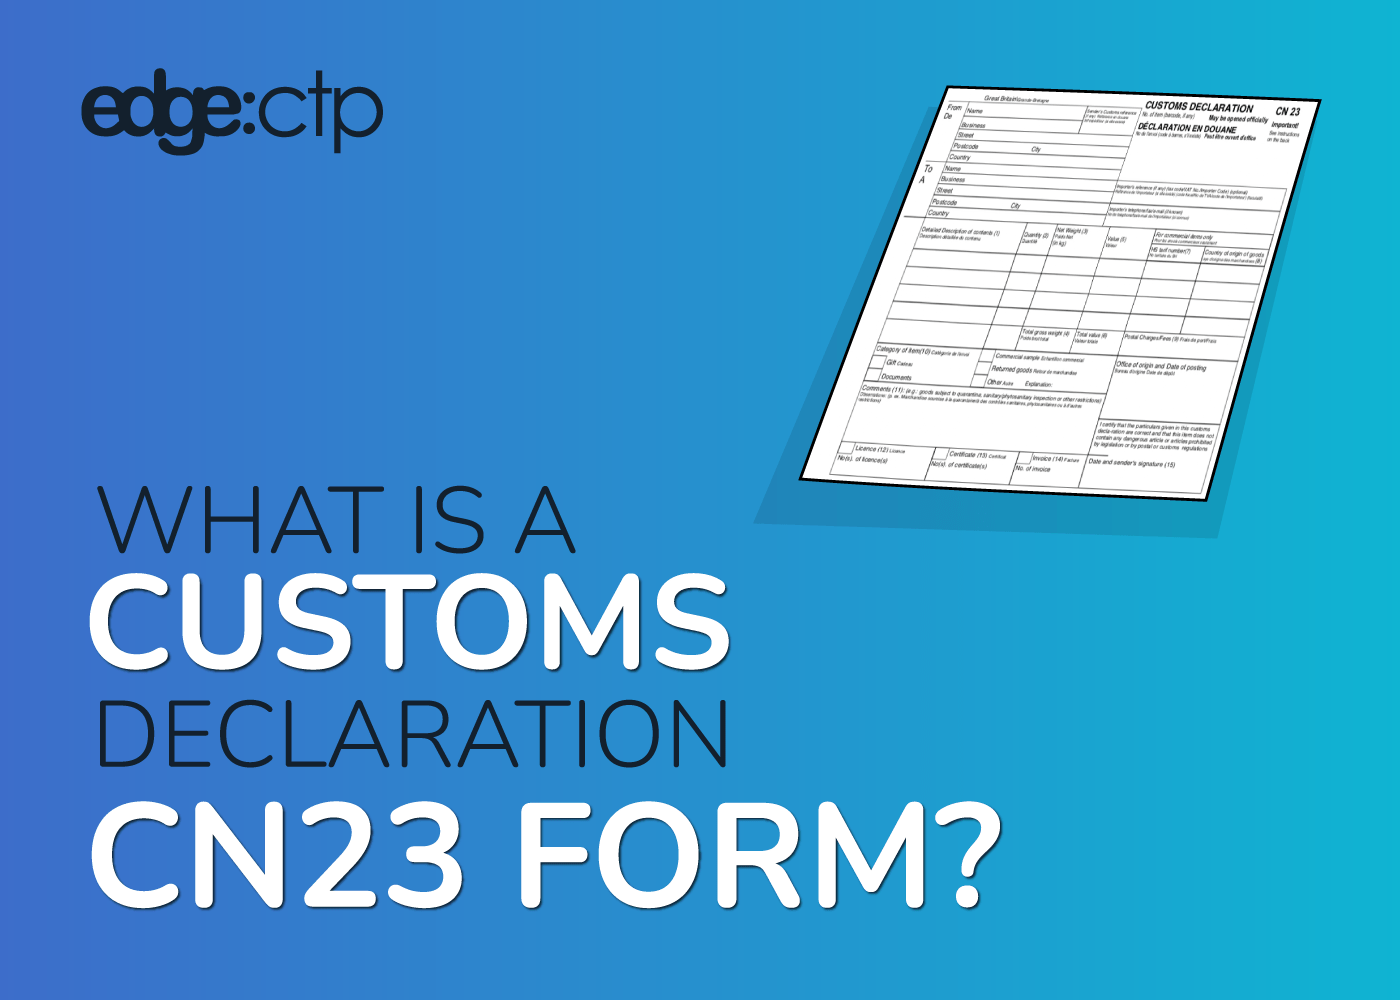 How to complete a Customs Declaration CN23 Form